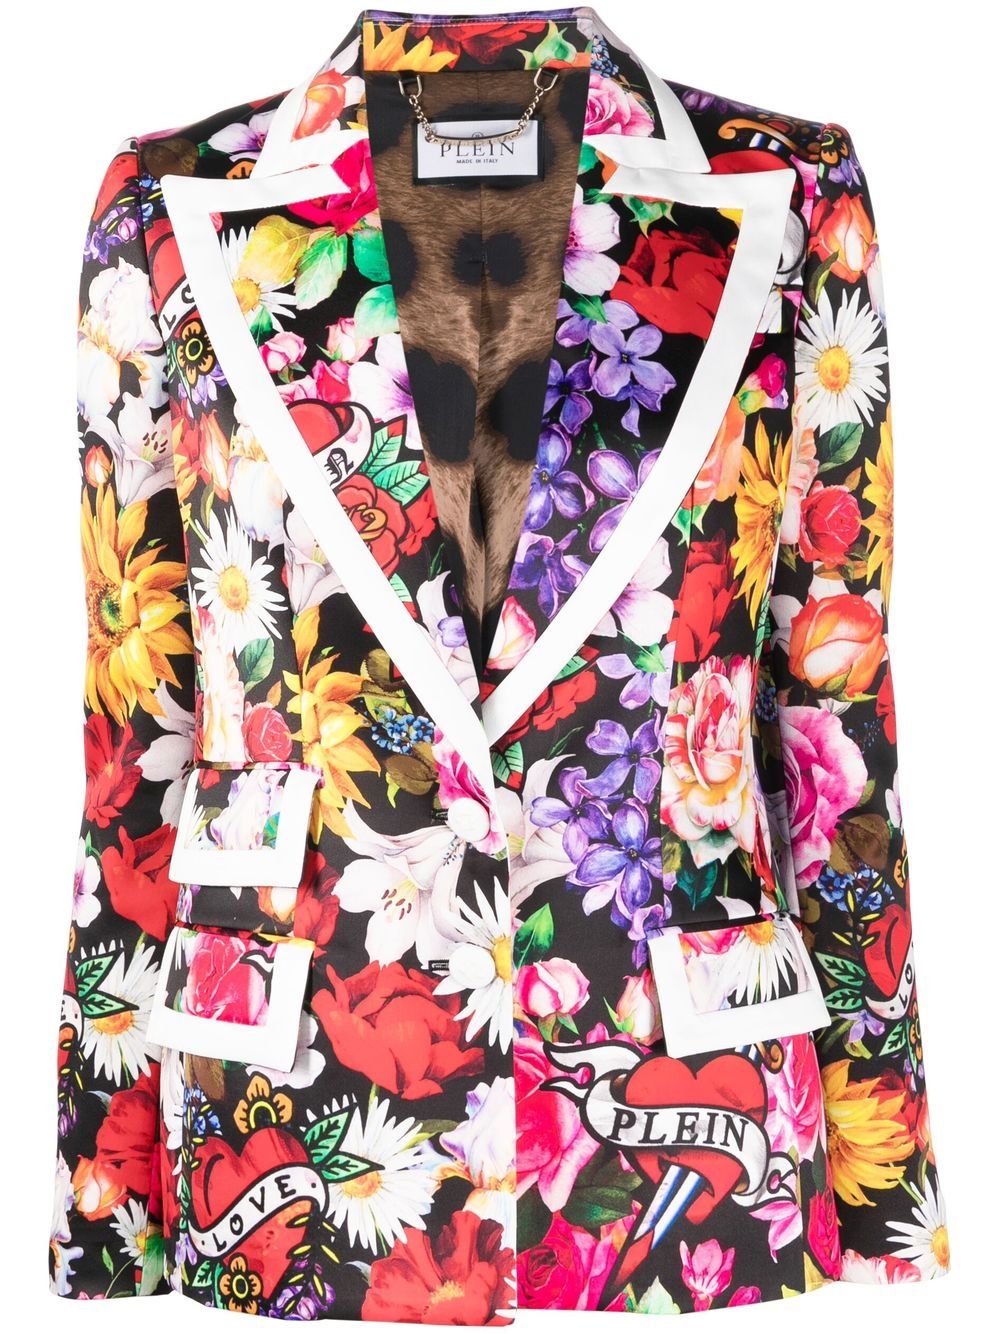 FAFWYP Womens Fahion Lapel Oversized Blazers Casual Floral Flowers